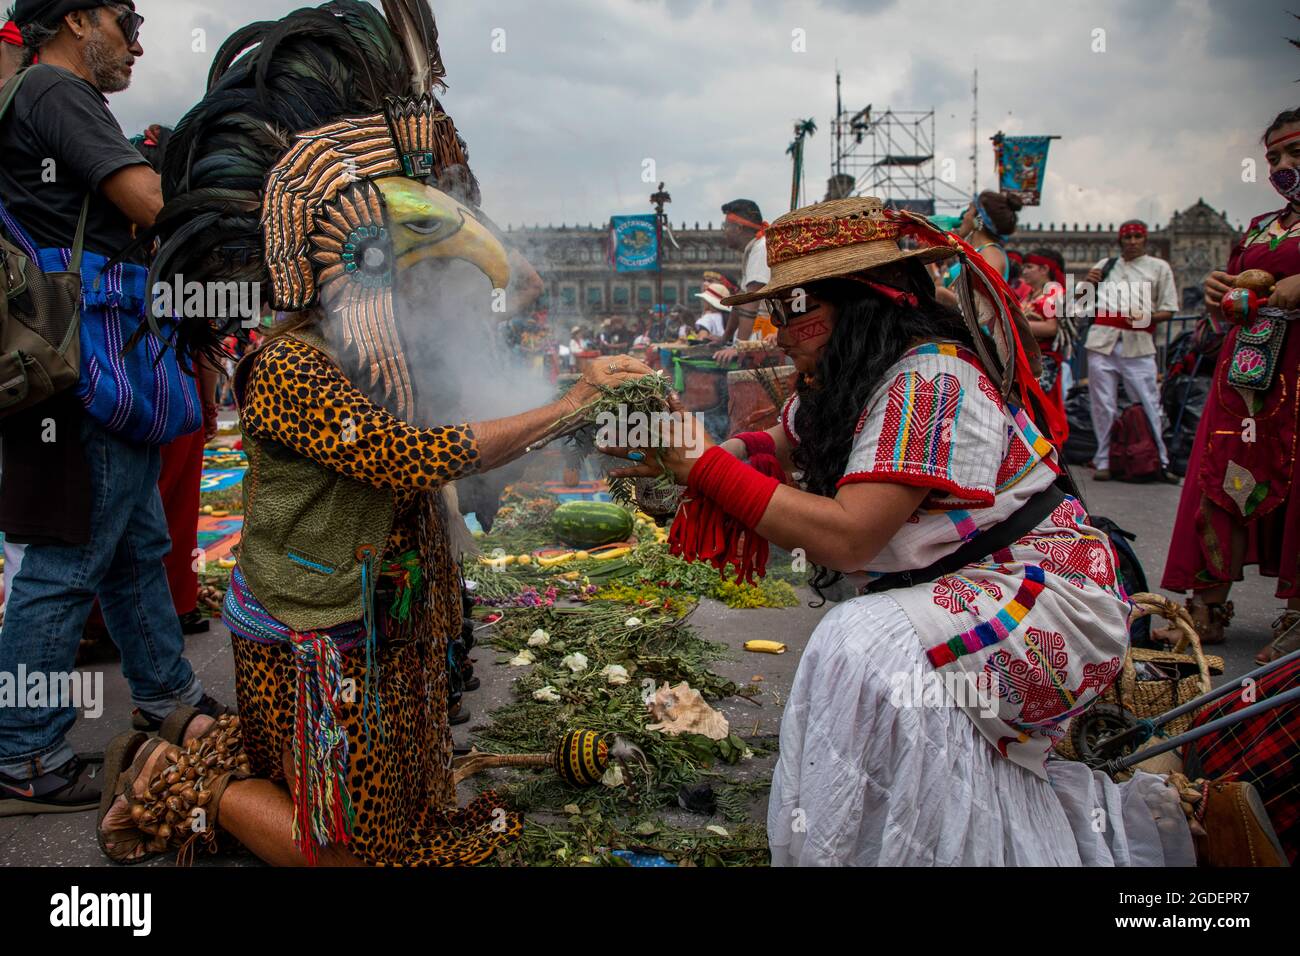 Mexiko Stadt, Mexico. 12th Aug, 2021. A woman performs a purification ritual on a person depicted as an Aztec warrior during the commemoration of the fall of Tenochtitlan. In 2021, Mexico will mark the 500th anniversary of the conquest of the Aztec land by the Spanish. (to dpa: Moctezuma's legacy: Mexico reworks conquest after 500 years) Credit: Jair Cabrera Torres/dpa/Alamy Live News Stock Photo